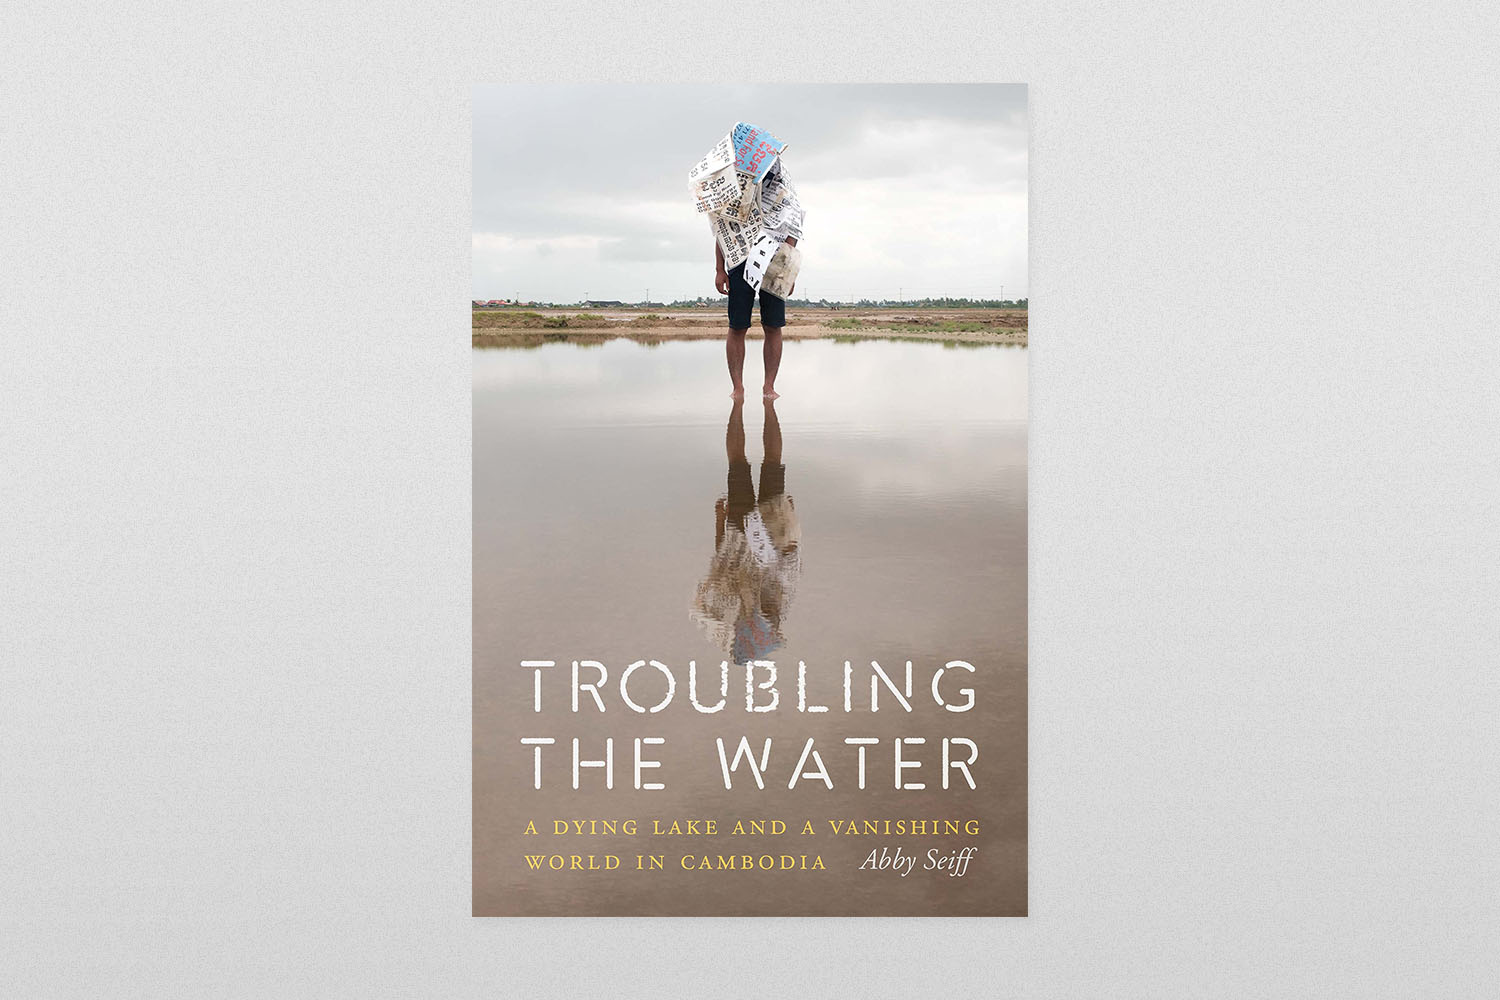 "Troubling the Water"